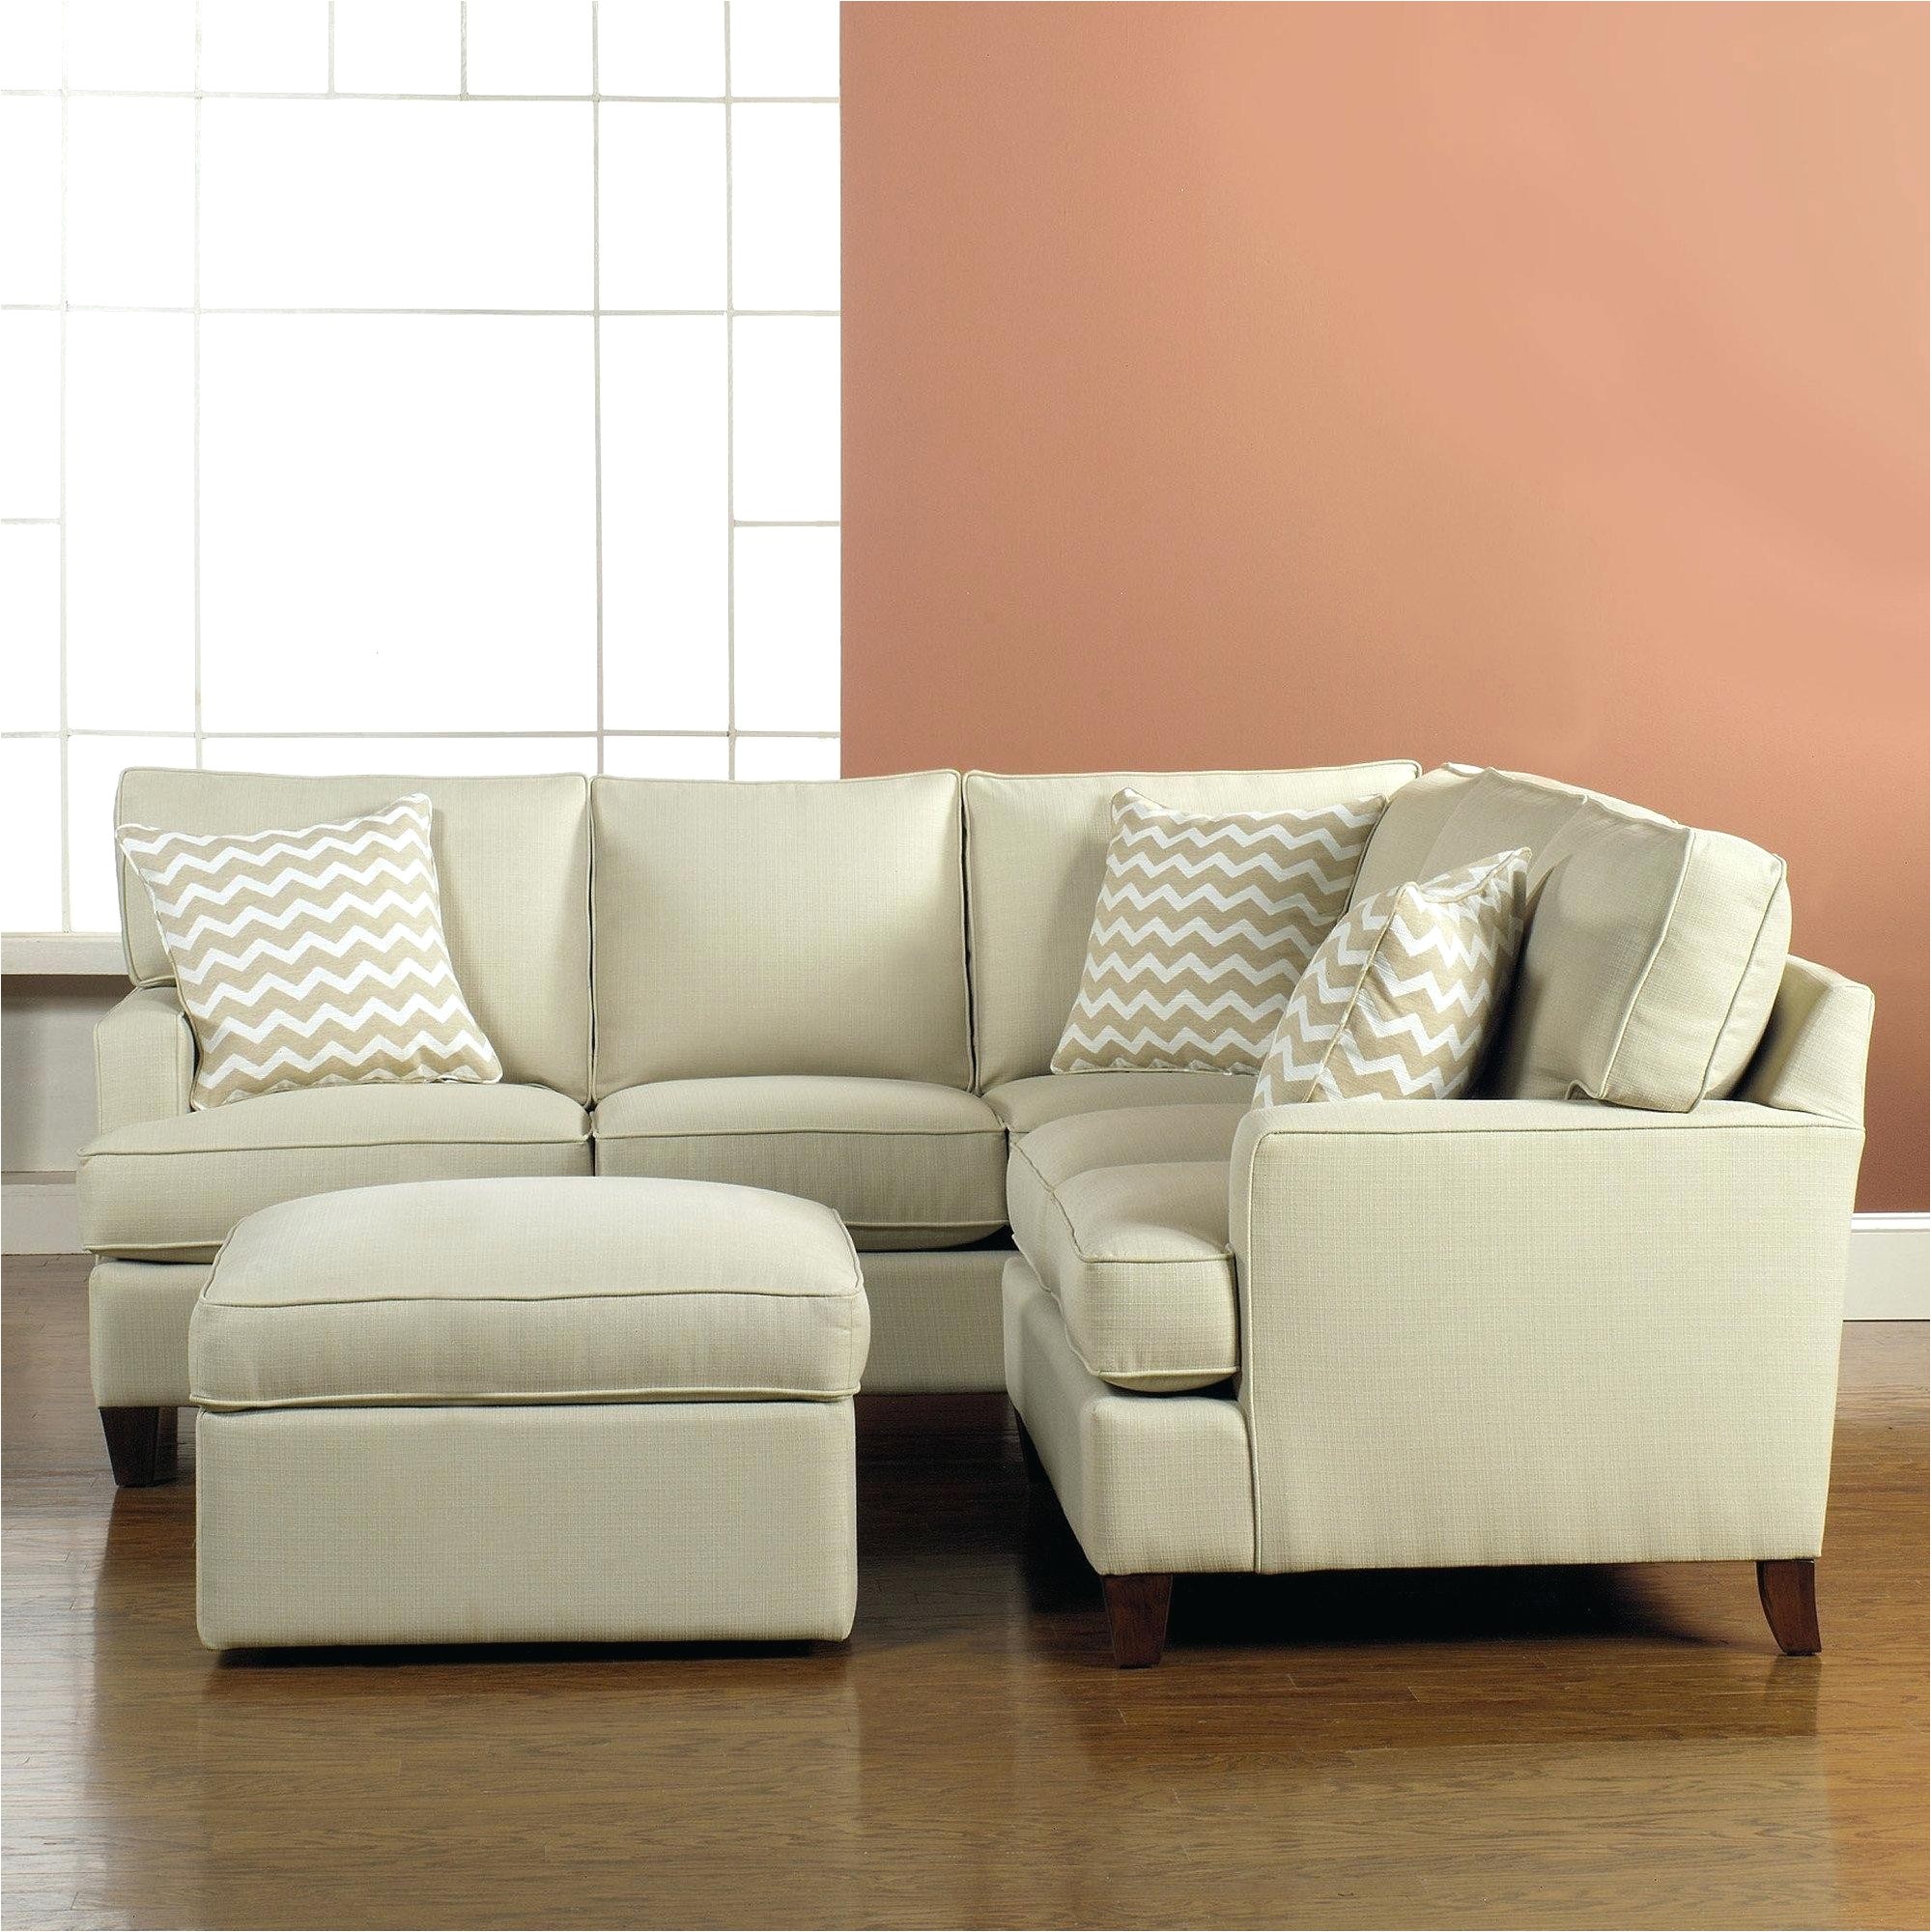 cheap sectional couches for sale sa sas used sofas vancouver near me